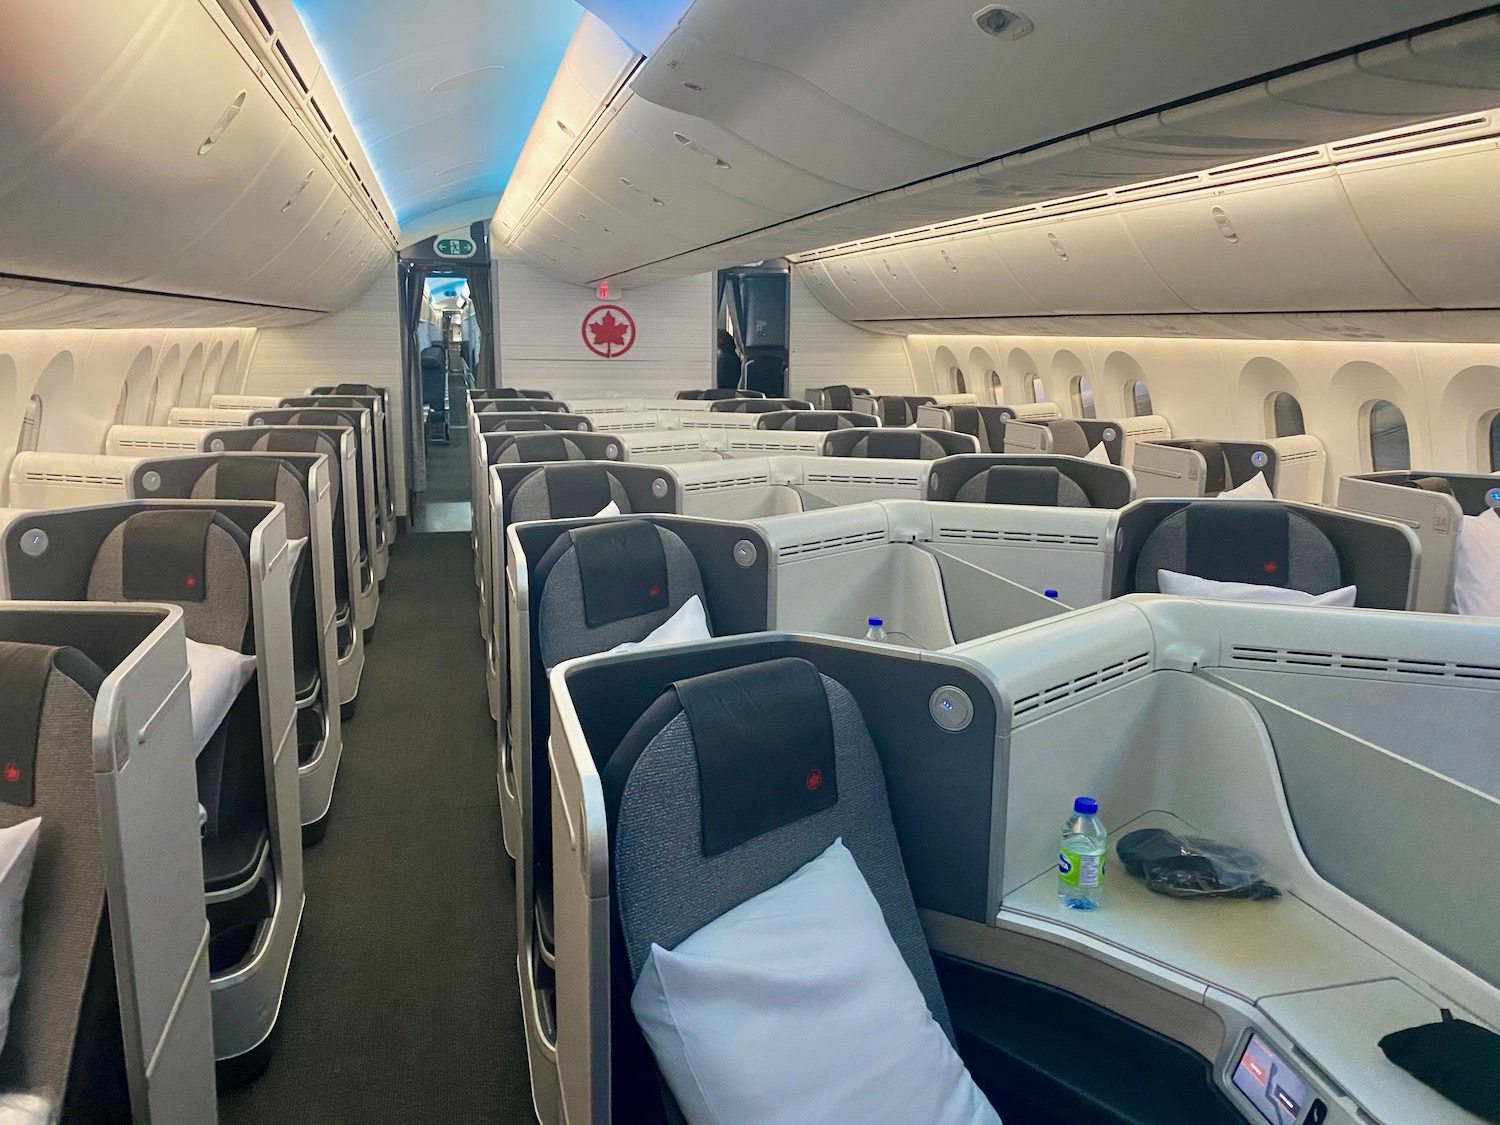 3. Review of Business Class Seats